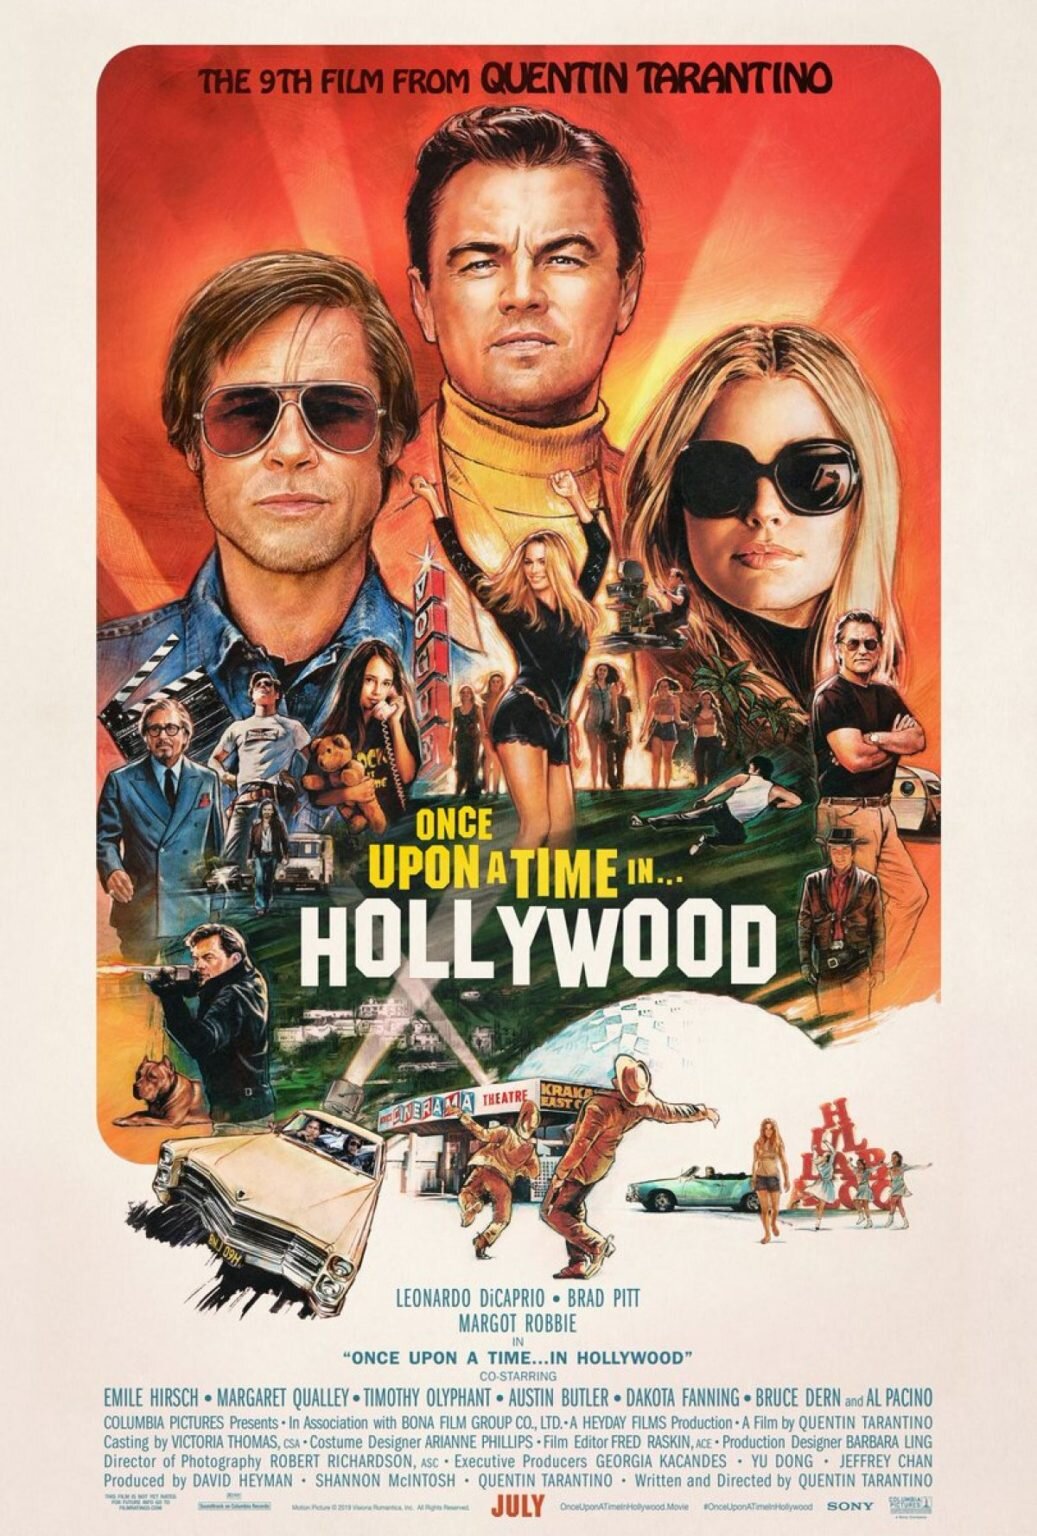 Once-Upon-A-Time-In-Hollywood-Poster-New-Header-2_1200_1778_81_s-1037x1536.jpg